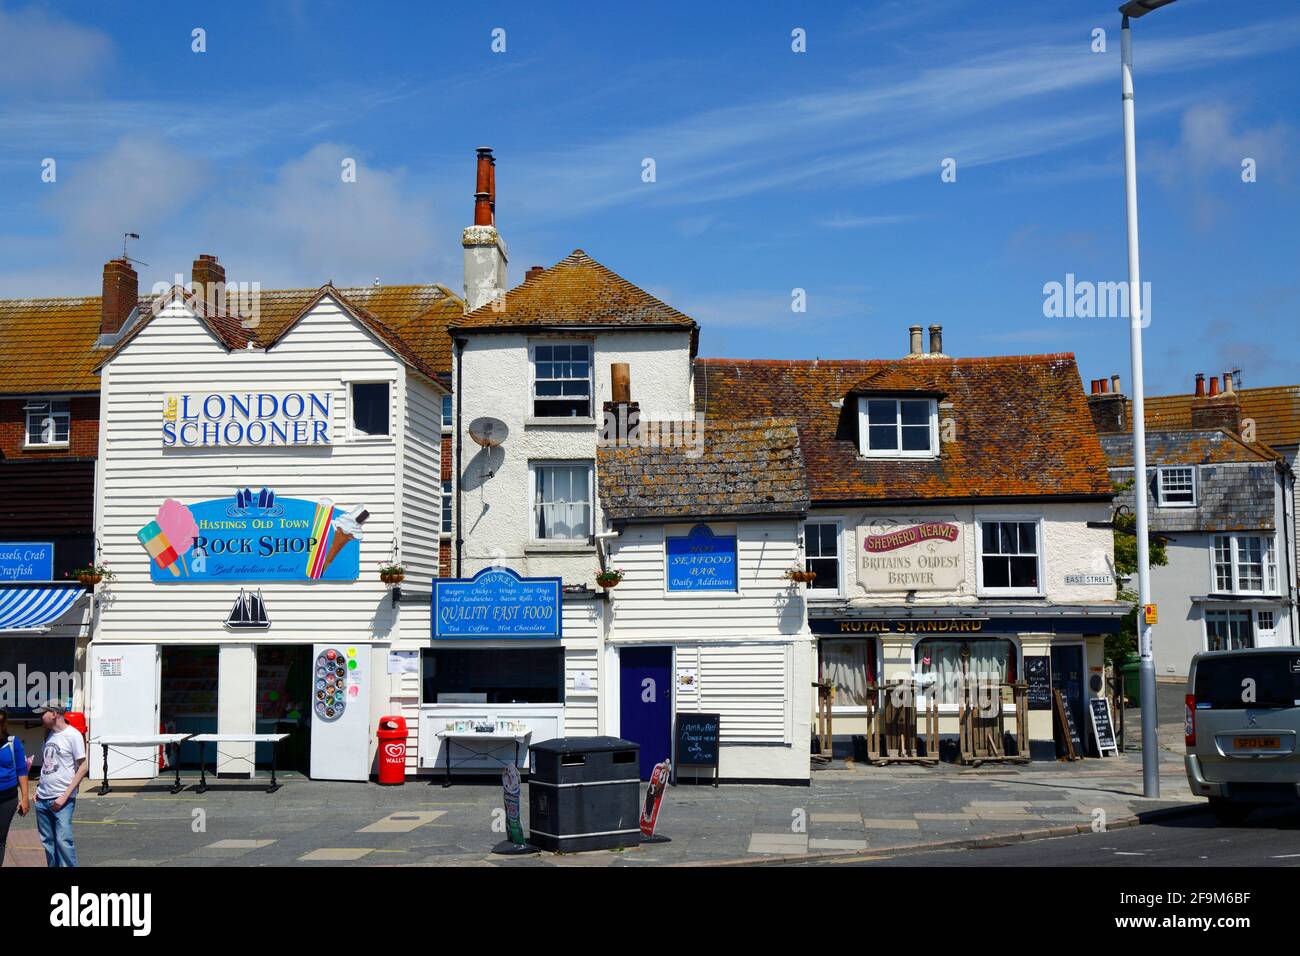 The London Schooner Rock Shop, Shores Seafood Bar und Royal Standard Pub an der A259 Sea Front in Old Town, Hastings, East Sussex, England Stockfoto